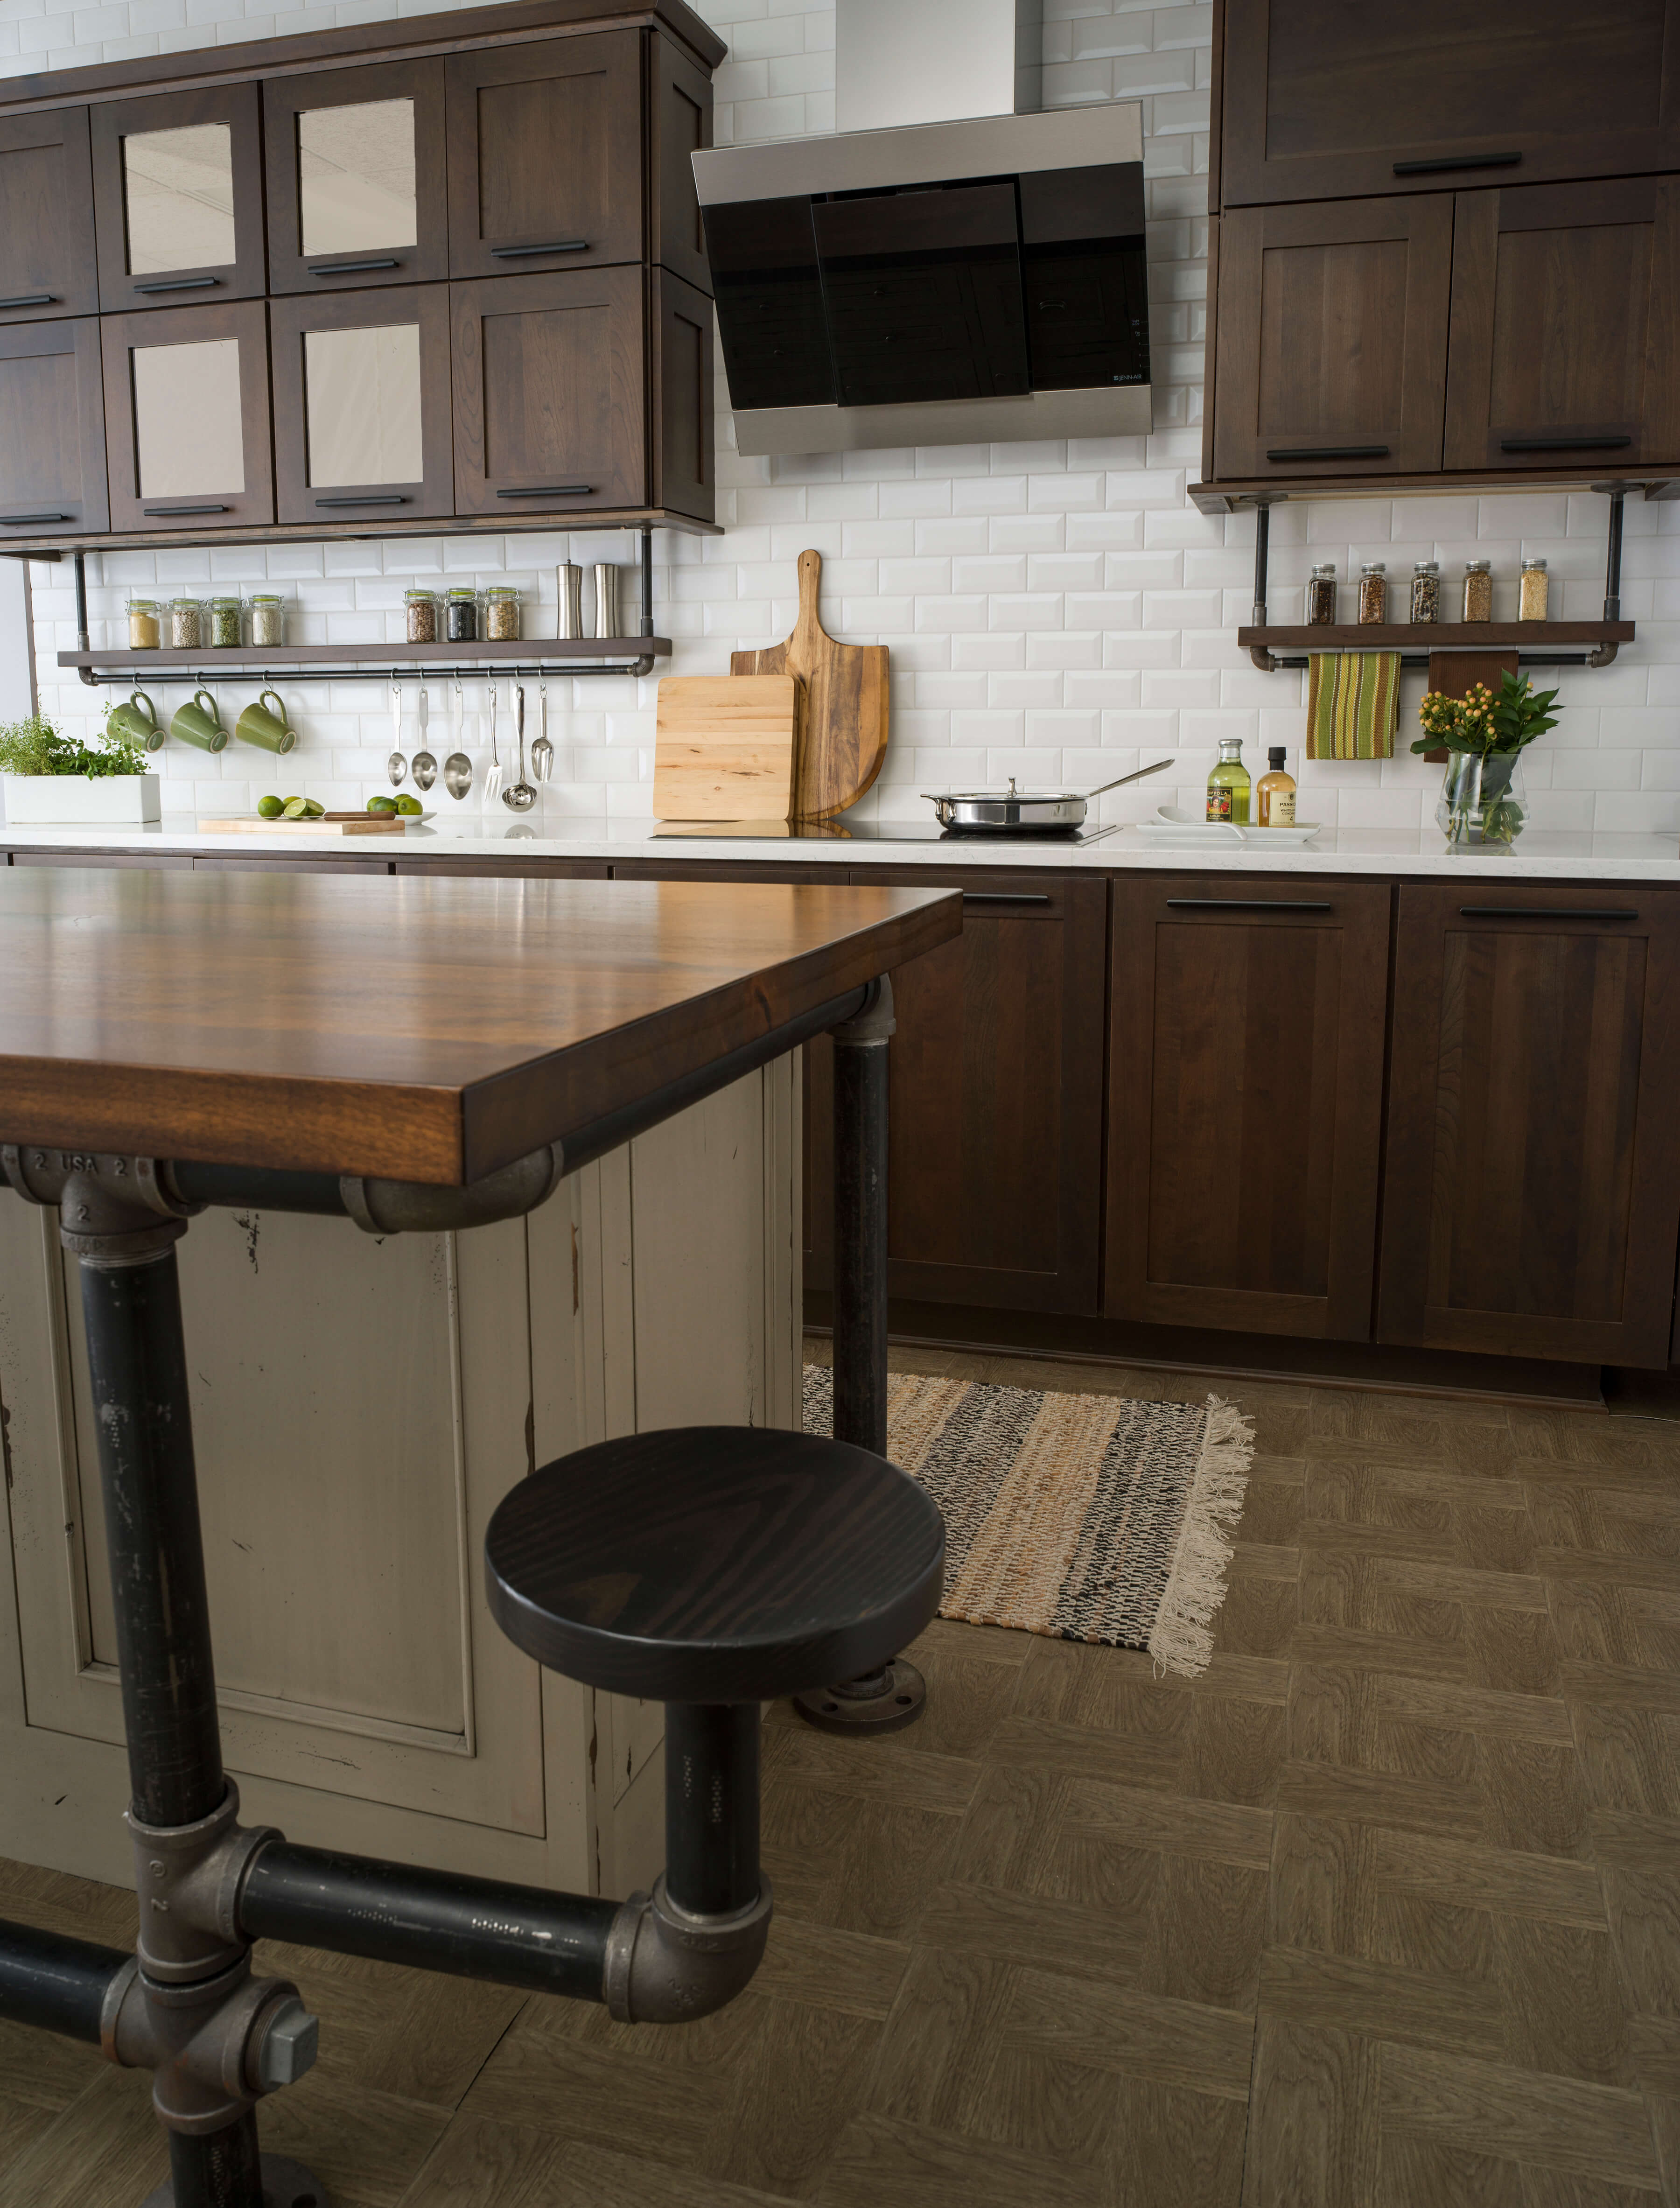 An industrial style kitchen remodel with modern and rustic cabinets. The distressed painted kitchen island has kitchen island stool stand made of pipe materials. Pipes are also used to accent the floating shelves below the wall cabinetry for displaying spices and hanging everyday cooking utensils.